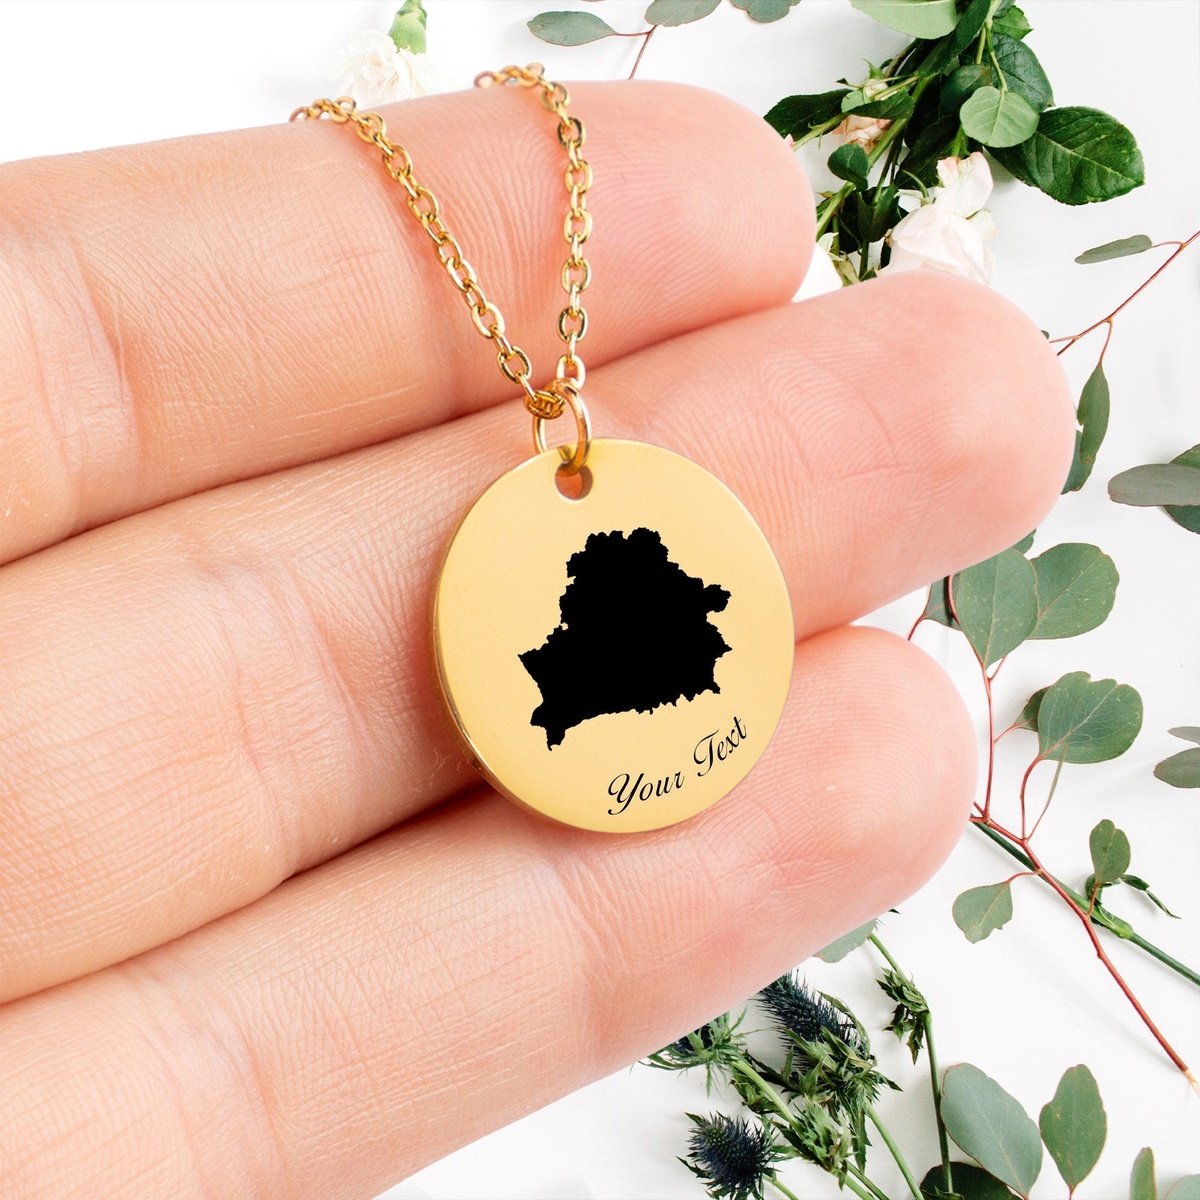 Belarus Country Map Necklace, Your Name Necklace, Minimalist Necklace, Personalized Gift, Silver Necklace, Gift For Him Her